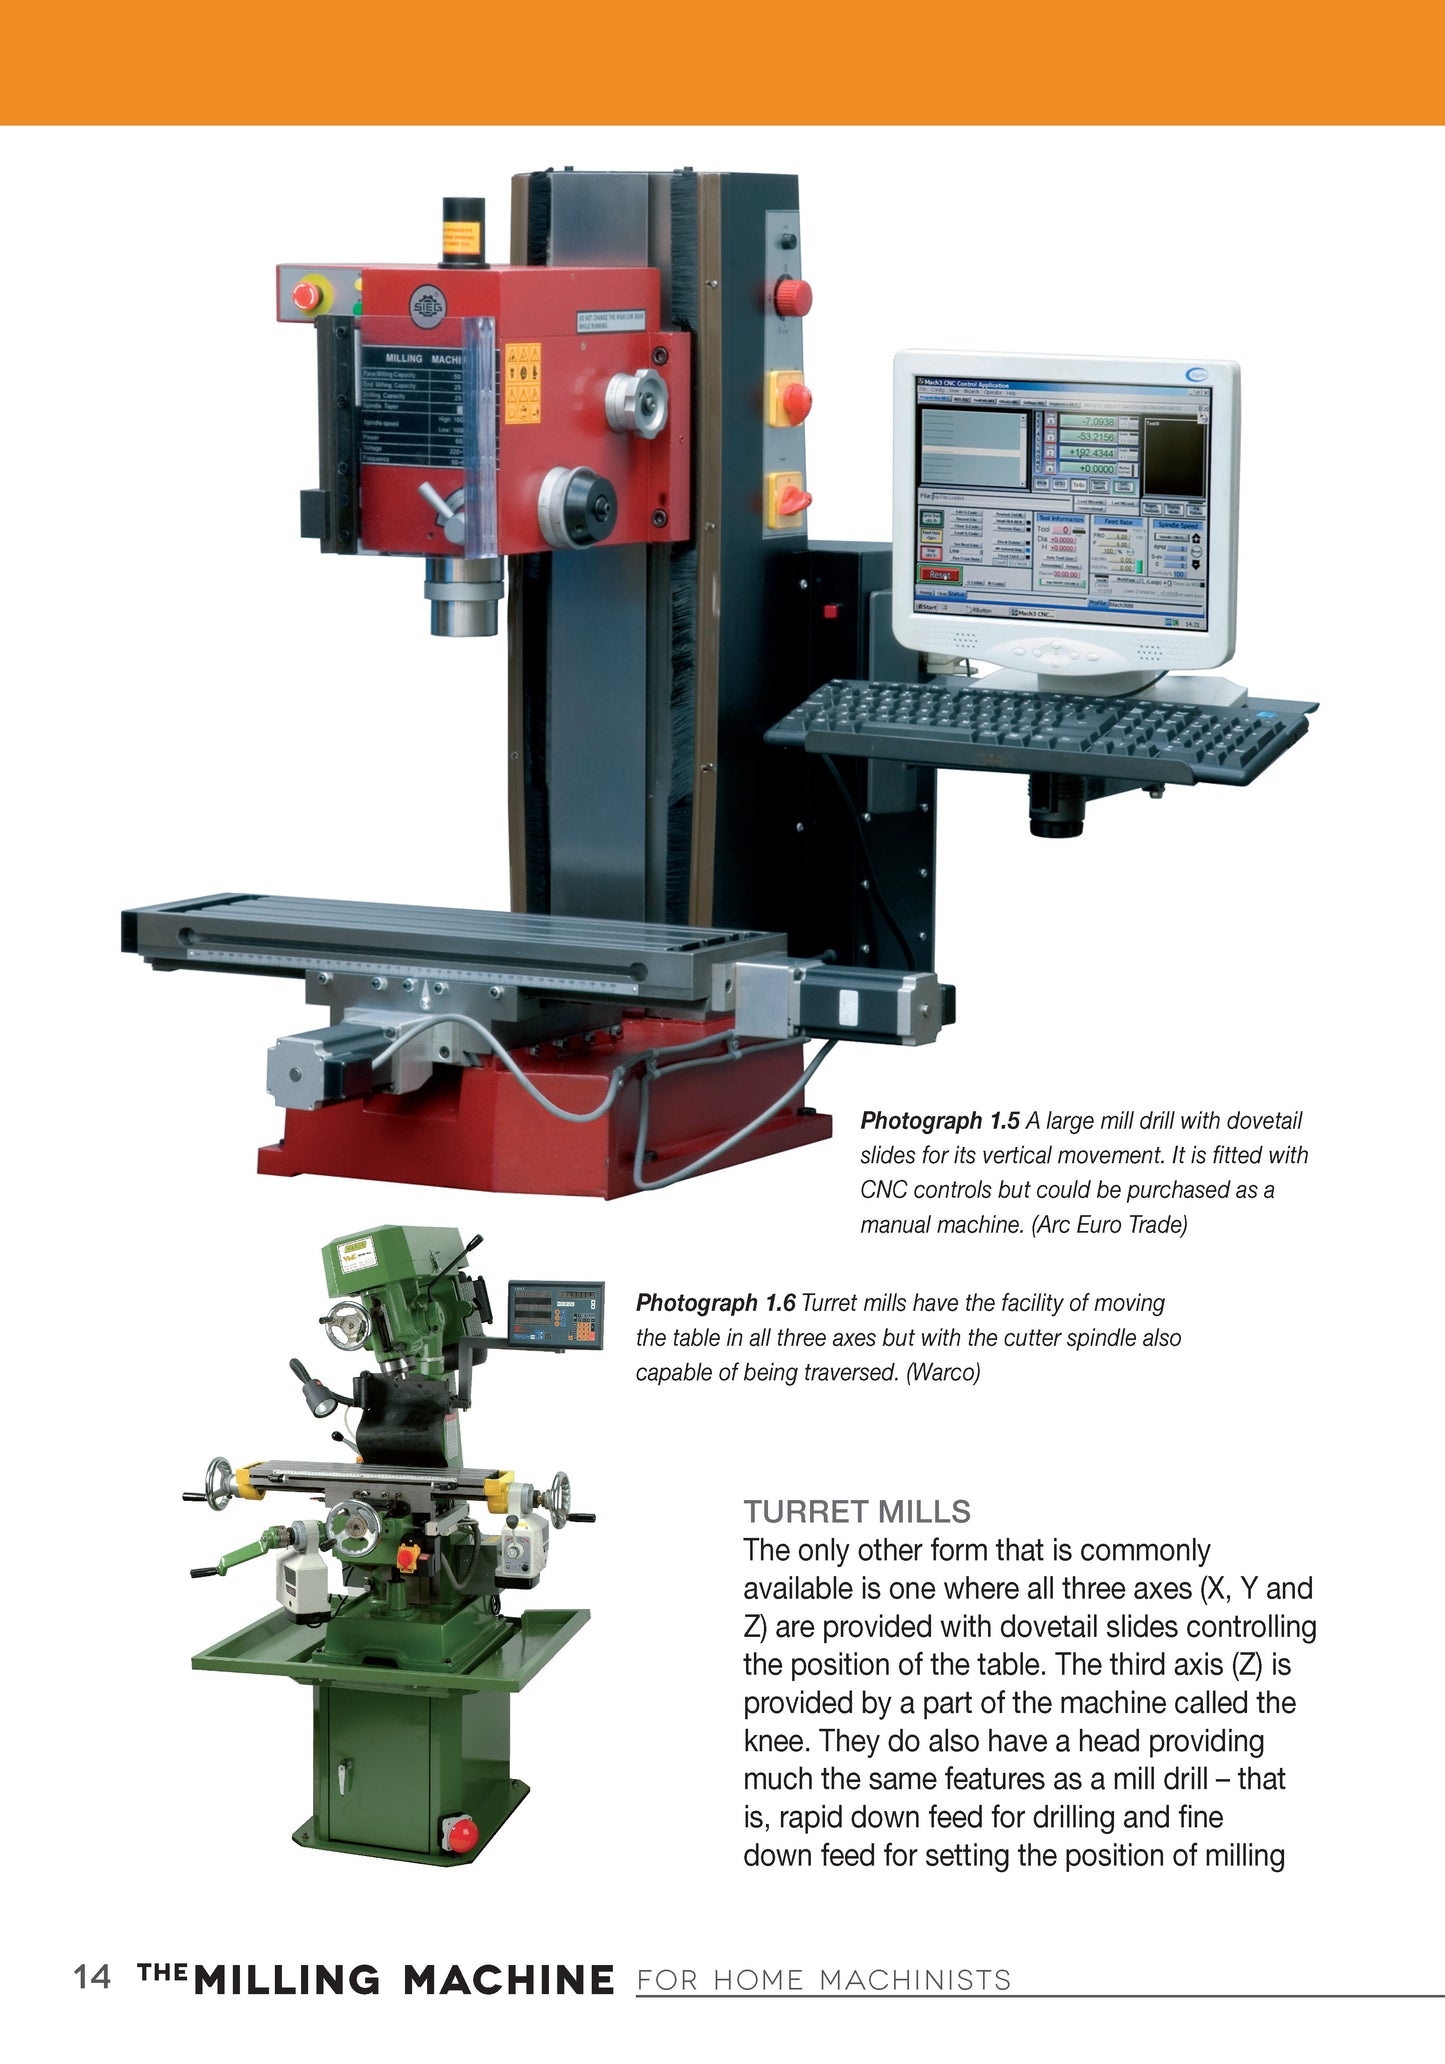 Milling Machine for Home Machinists, The